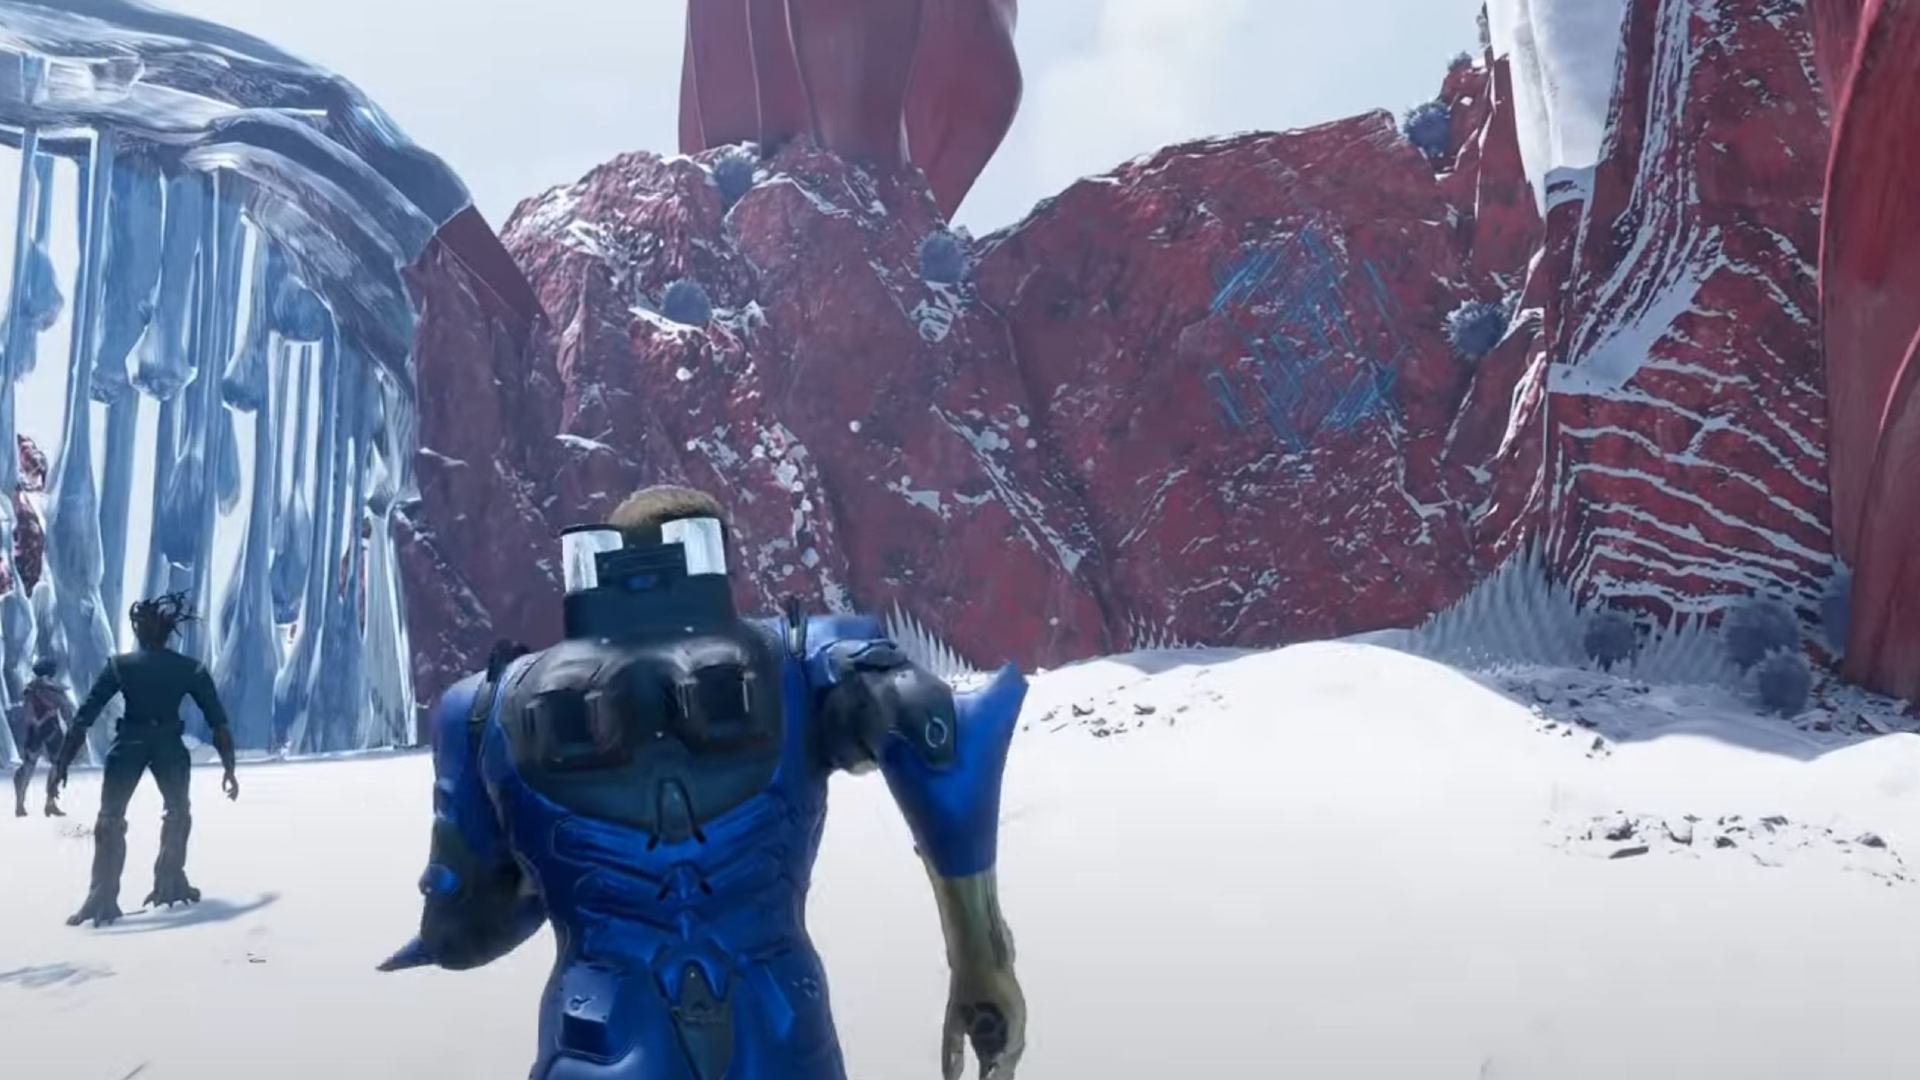 Guardians of the Galaxy outfit locations: Star-Lord is running towards the icicles, while looking at the rock to the right.